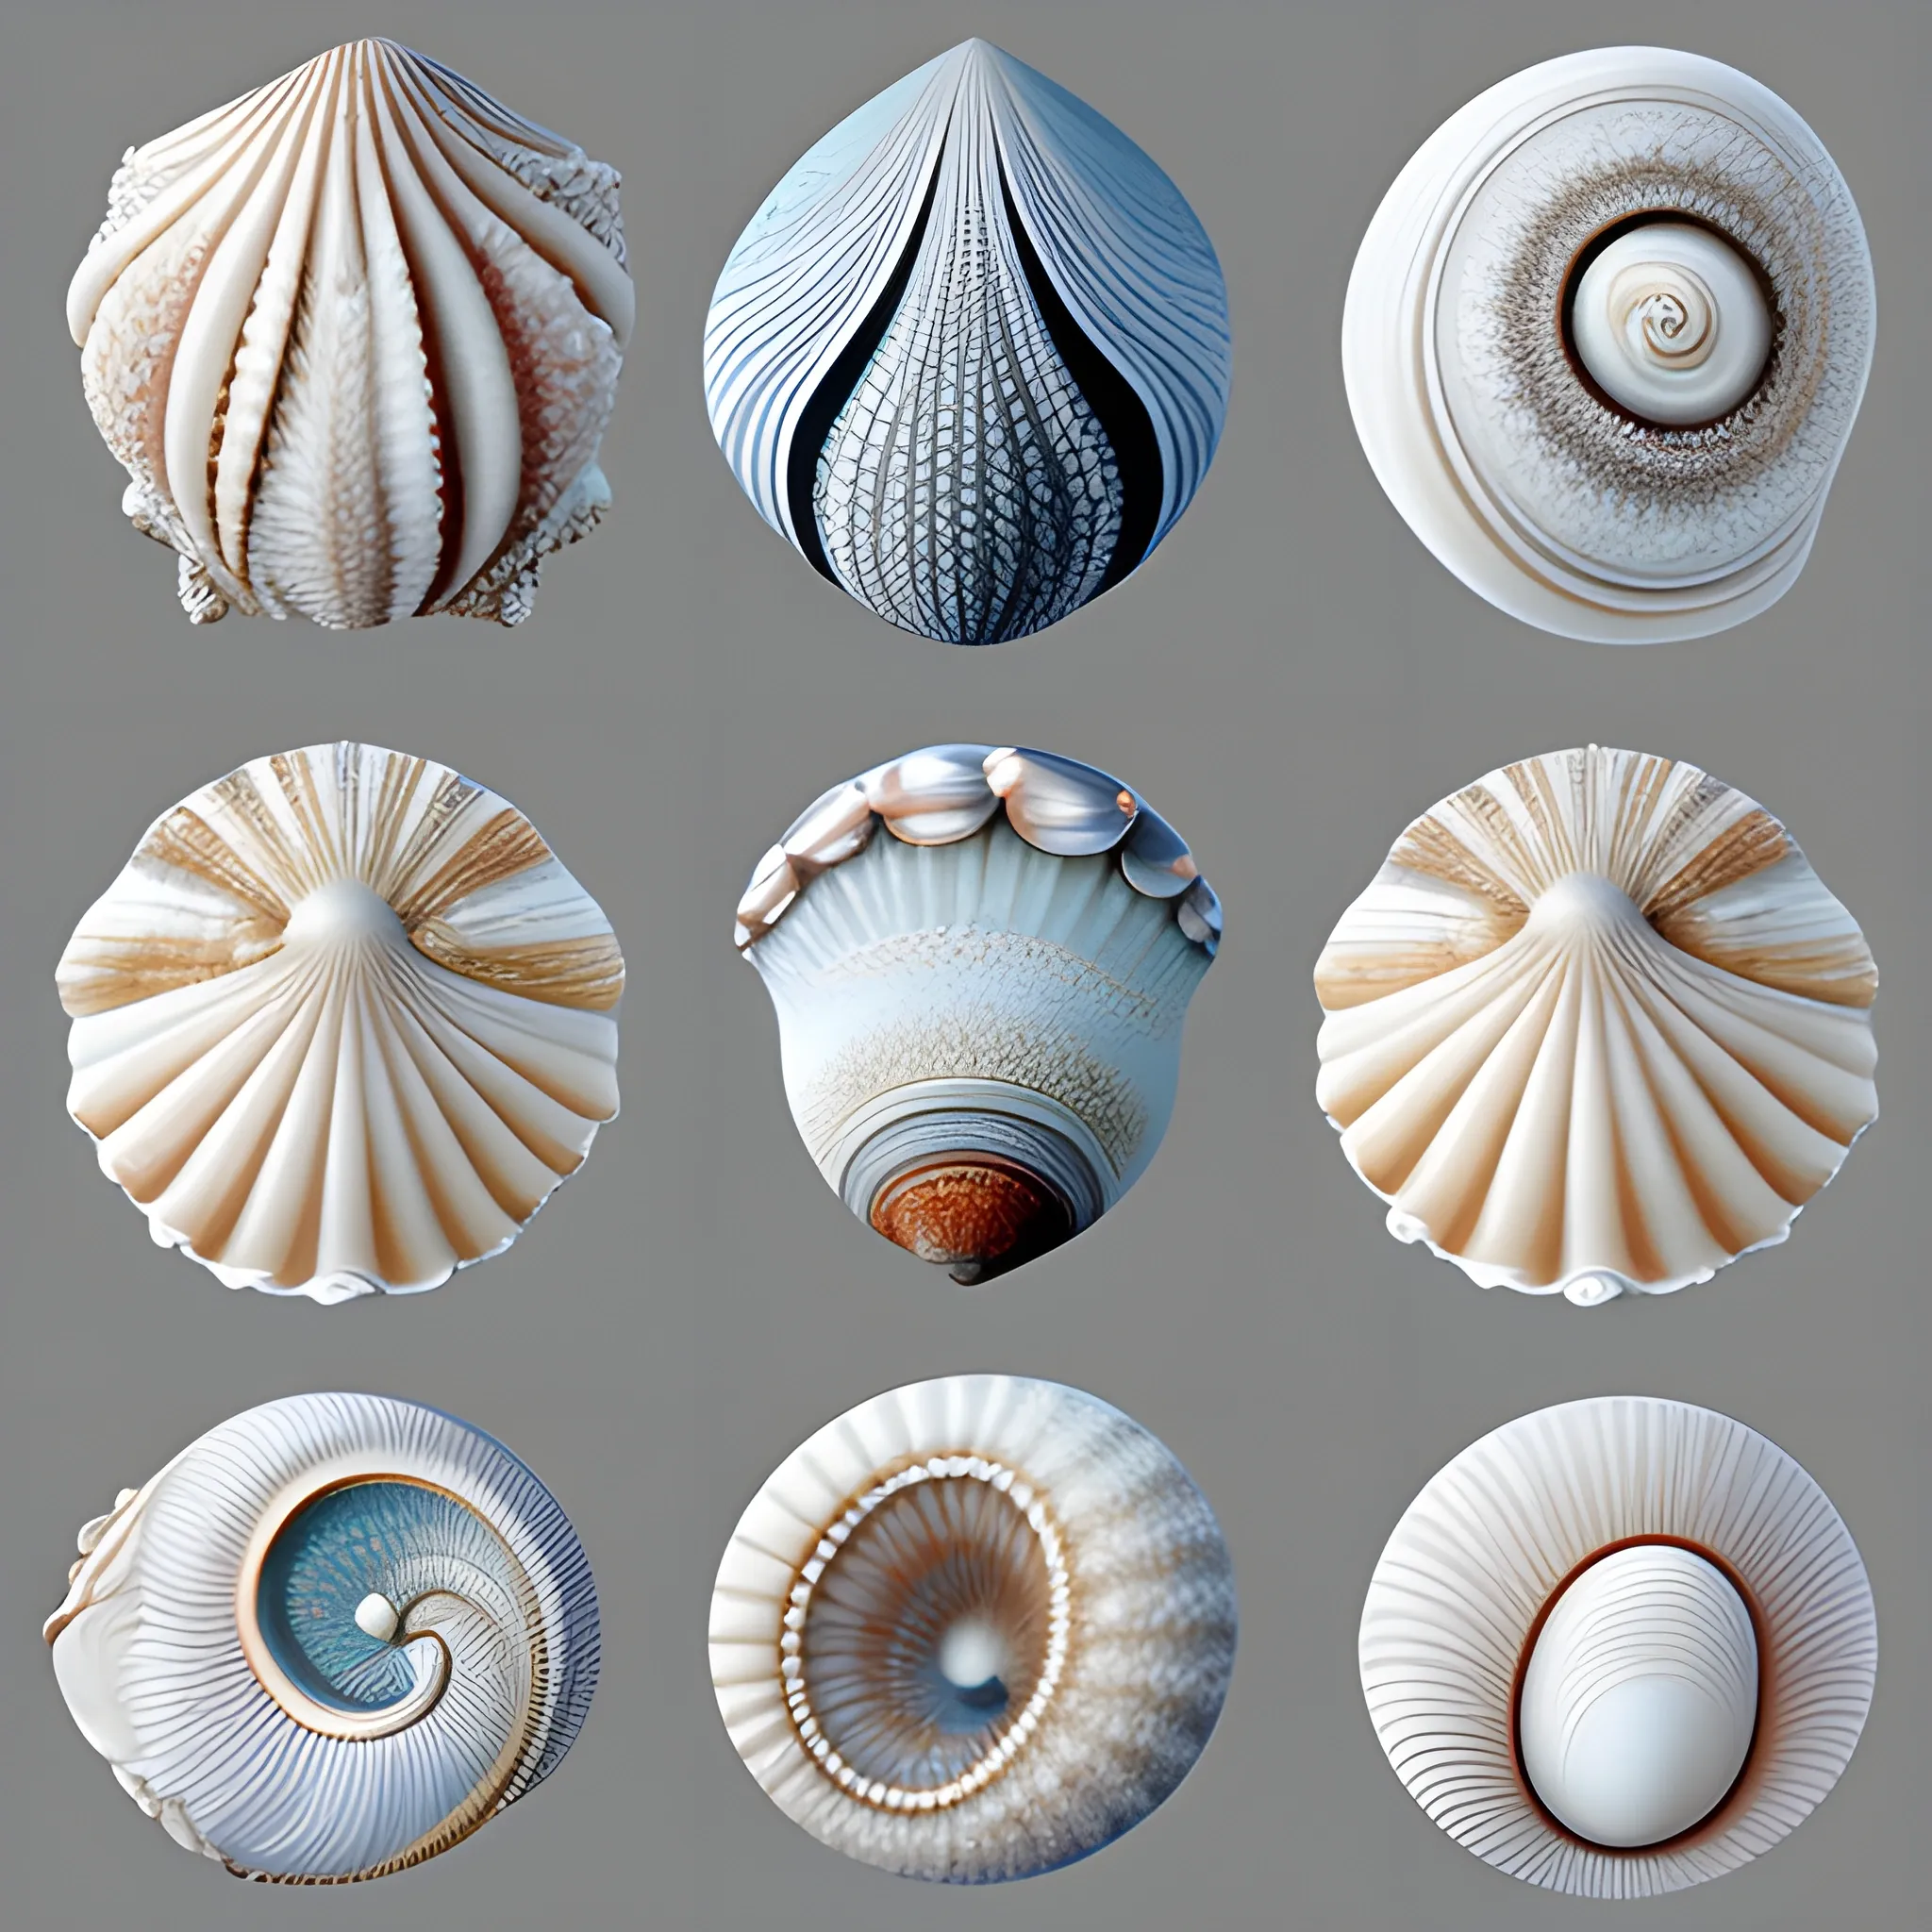 Croquis, close-up macro shots of unusual sea creatures among dazzling white sands and vivid shells on the seafloor using available light, in the style of fashion sketches.